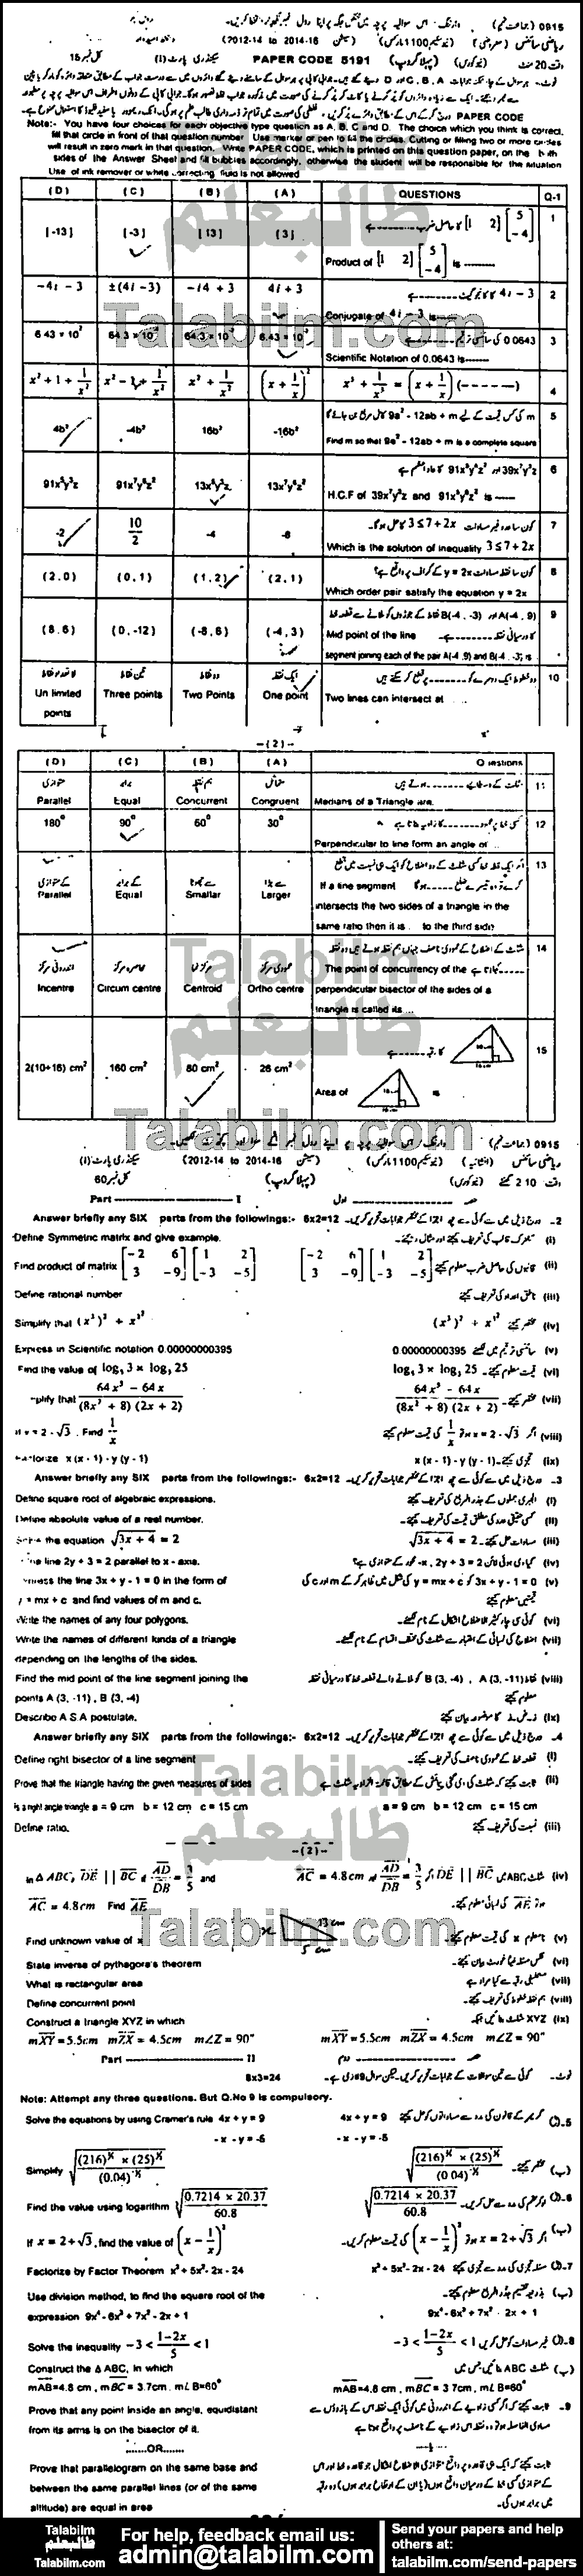 Math 0 past paper for 2015 Group-I